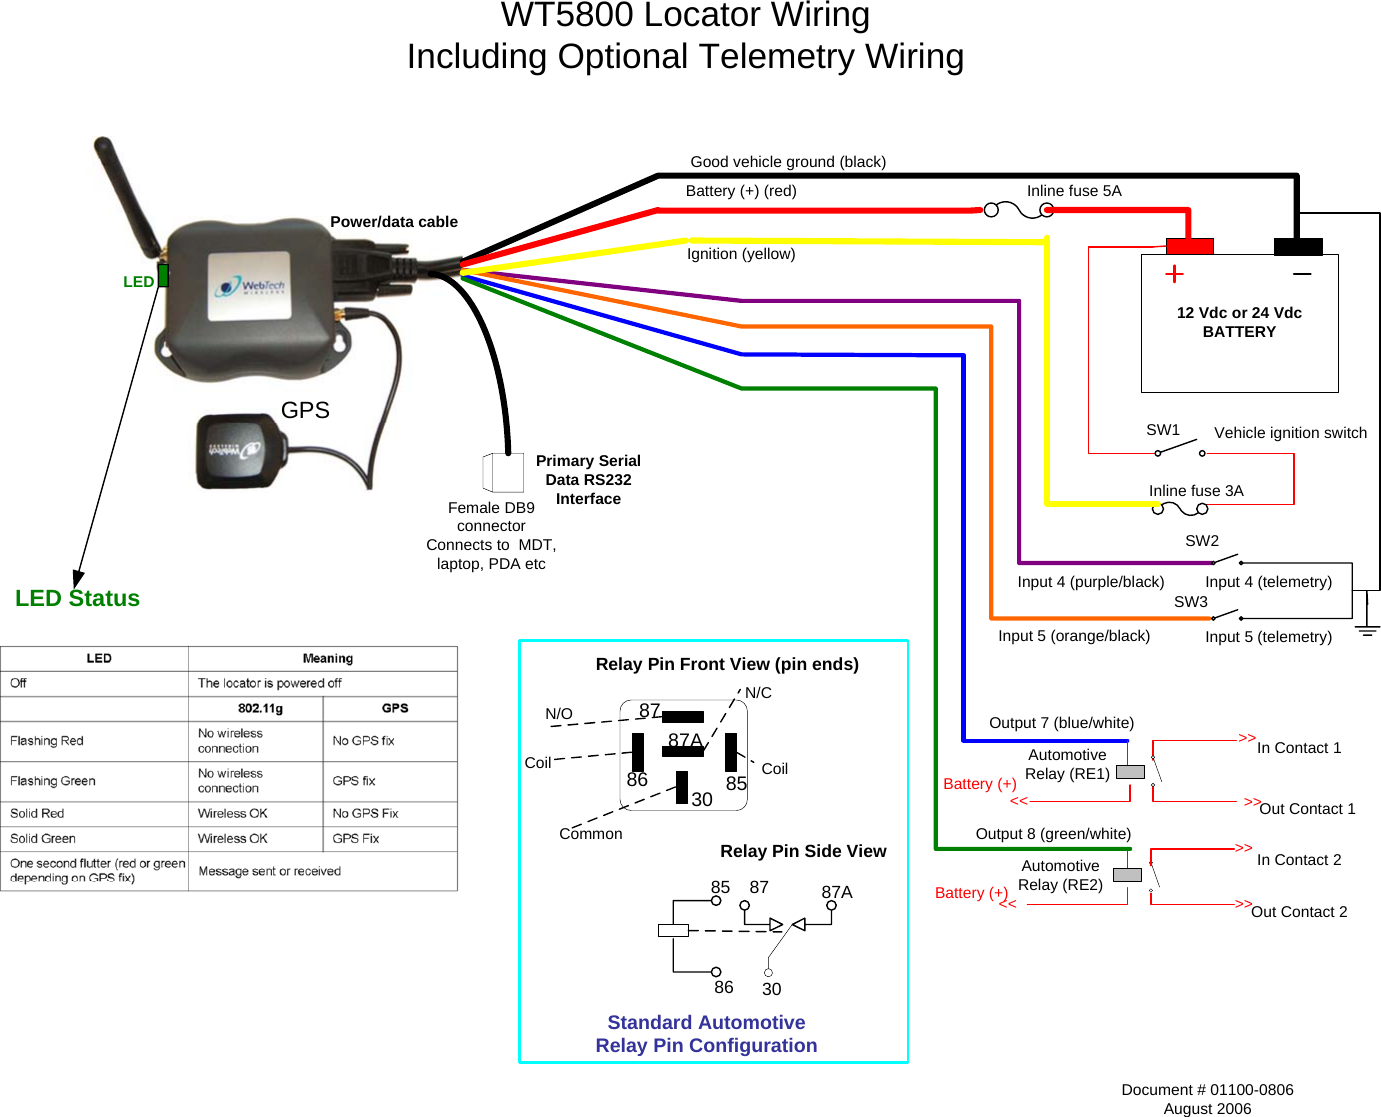 Power/data cableLEDPrimary Serial Data RS232 InterfaceFemale DB9 connectorConnects to  MDT, laptop, PDA etcGood vehicle ground (black)Battery (+) (red)Ignition (yellow)12 Vdc or 24 Vdc BATTERYInline fuse 5AInline fuse 3AVehicle ignition switchInput 4 (purple/black)Input 5 (orange/black)Input 4 (telemetry)Input 5 (telemetry)Output 7 (blue/white)Output 8 (green/white)&gt;&gt;&gt;&gt;&lt;&lt;In Contact 1Out Contact 1Battery (+)&lt;&lt; &gt;&gt;&gt;&gt; In Contact 2Out Contact 2Battery (+)Automotive Relay (RE1)Automotive Relay (RE2)30 85868787ARelay Pin Front View (pin ends)N/ON/CCoilCommonCoilRelay Pin Side View 86 3085 87 87AStandard Automotive Relay Pin ConfigurationLED StatusWT5800 Locator WiringIncluding Optional Telemetry WiringGPSSW2SW3SW1Document # 01100-0806August 2006